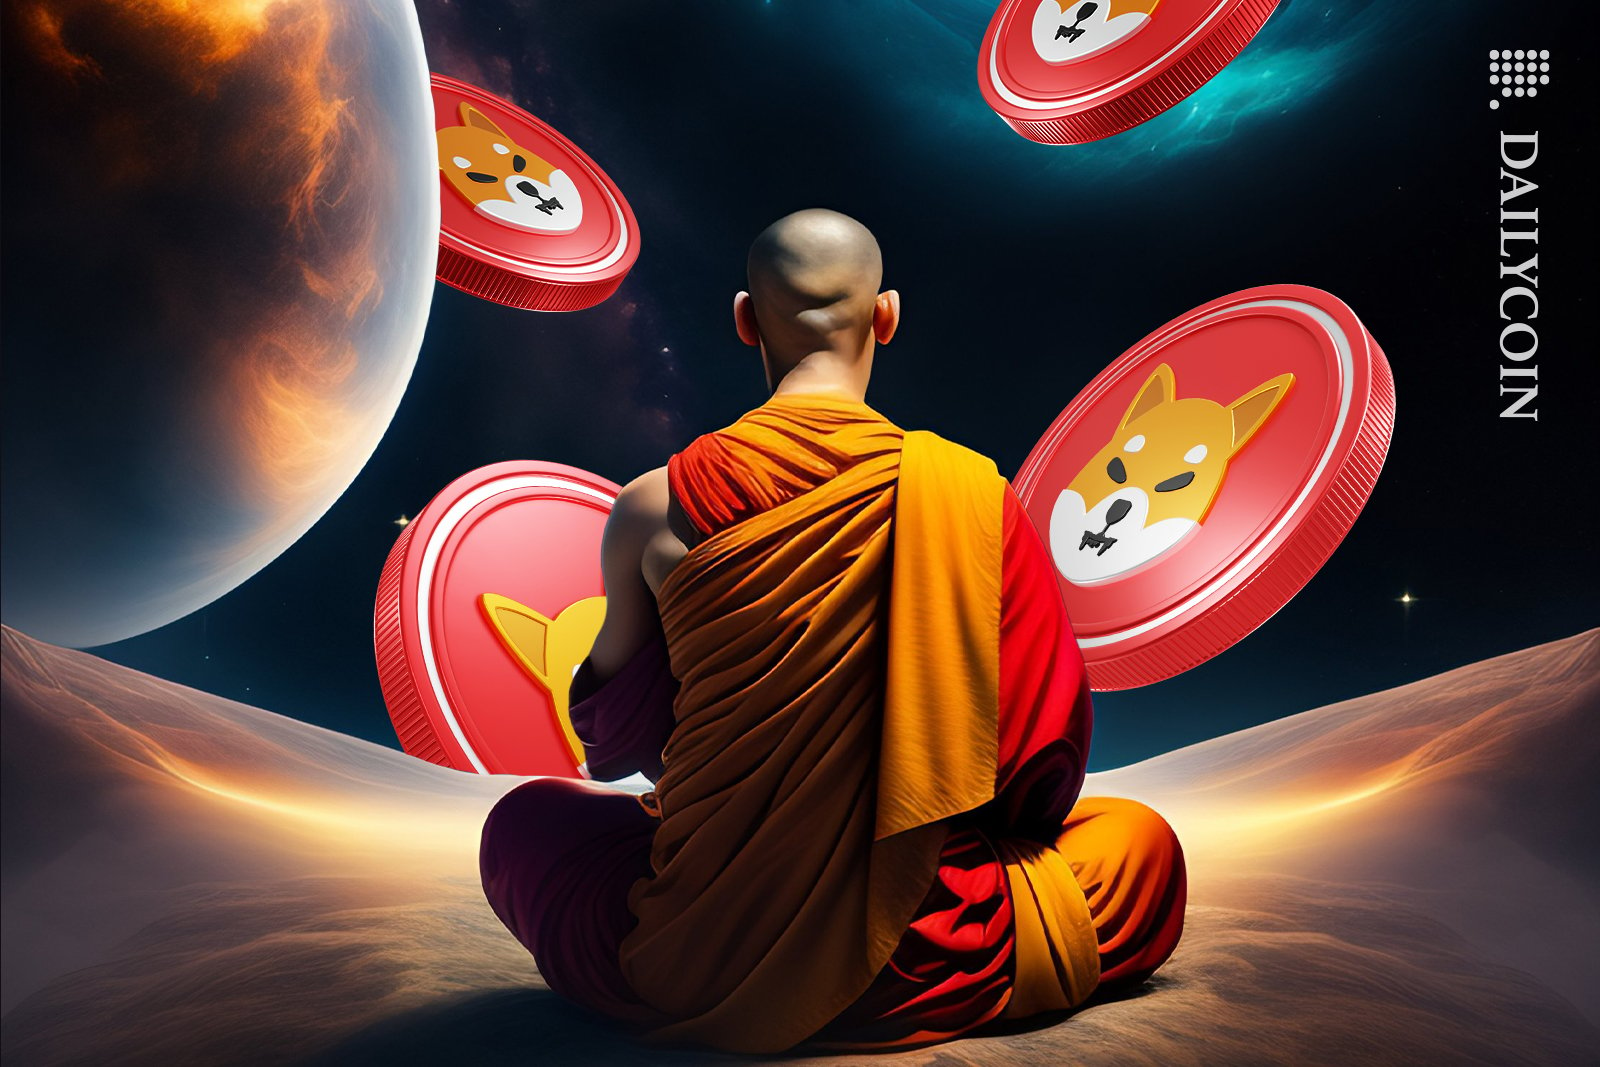 Monk praying for Shiba coins at outer space.